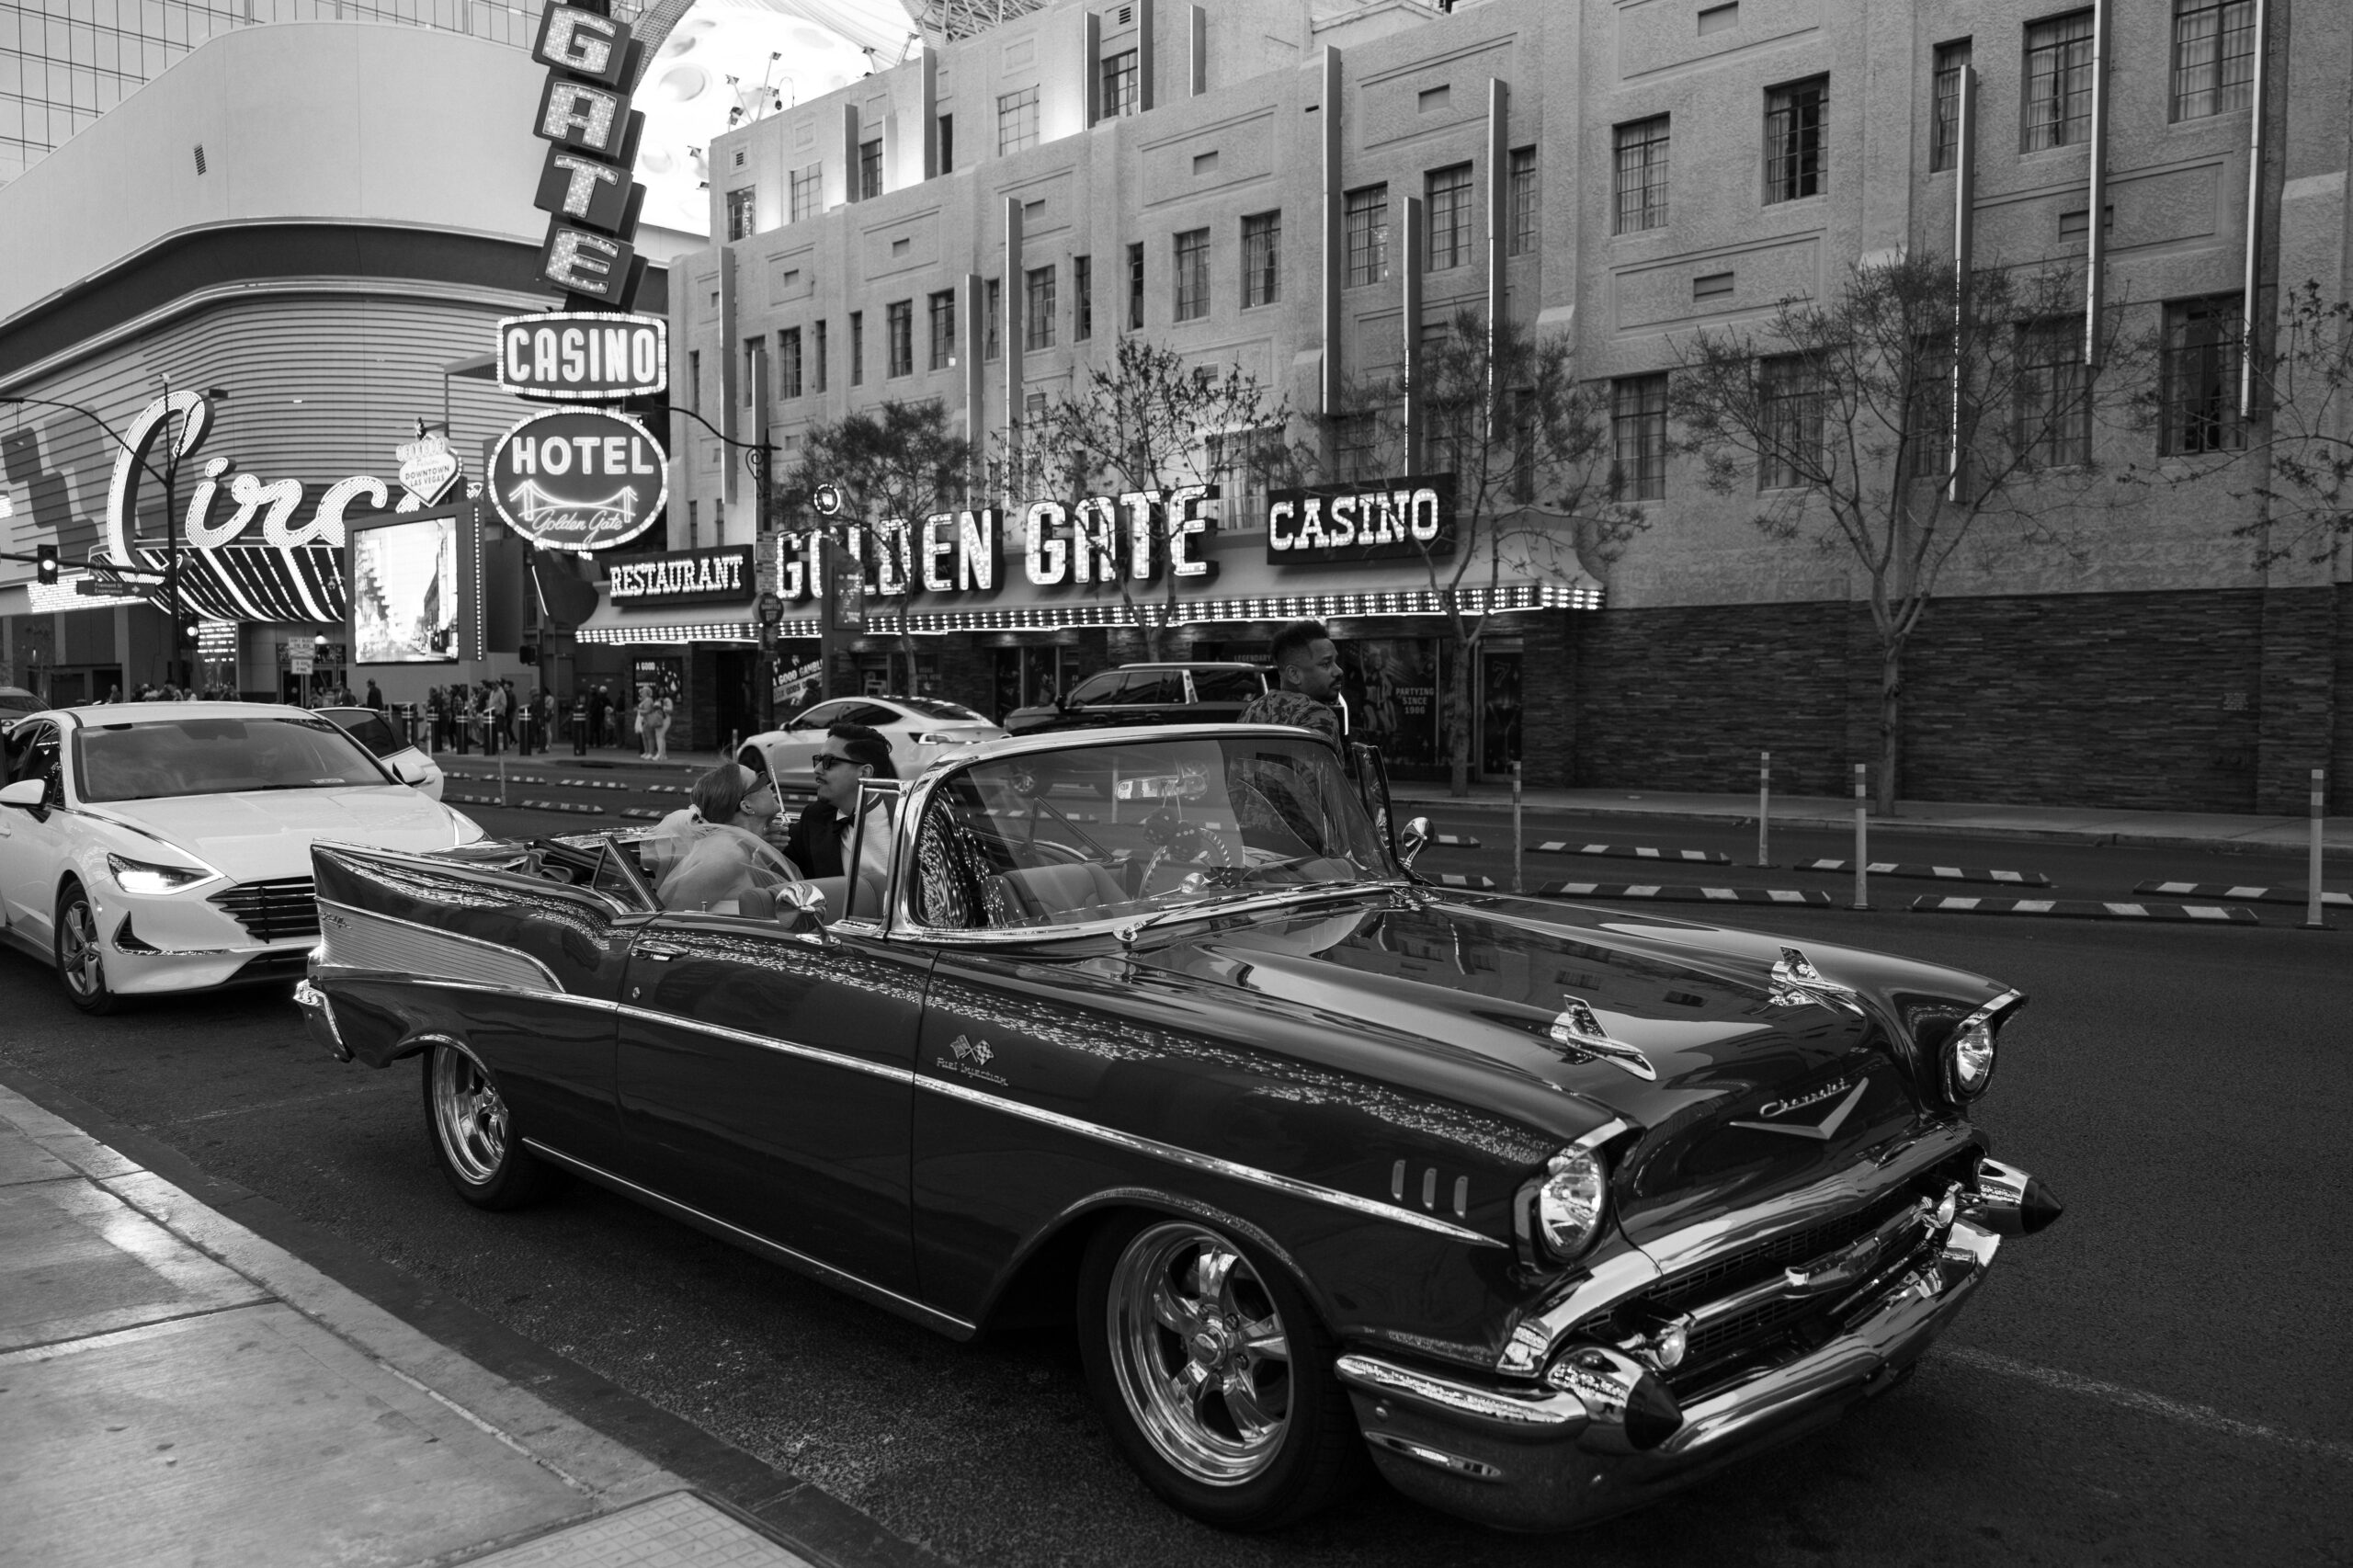 Black and white photo of a bride and groom sitting in a classic Chevrolet in front of Golden Gate Casino in Vegas. 